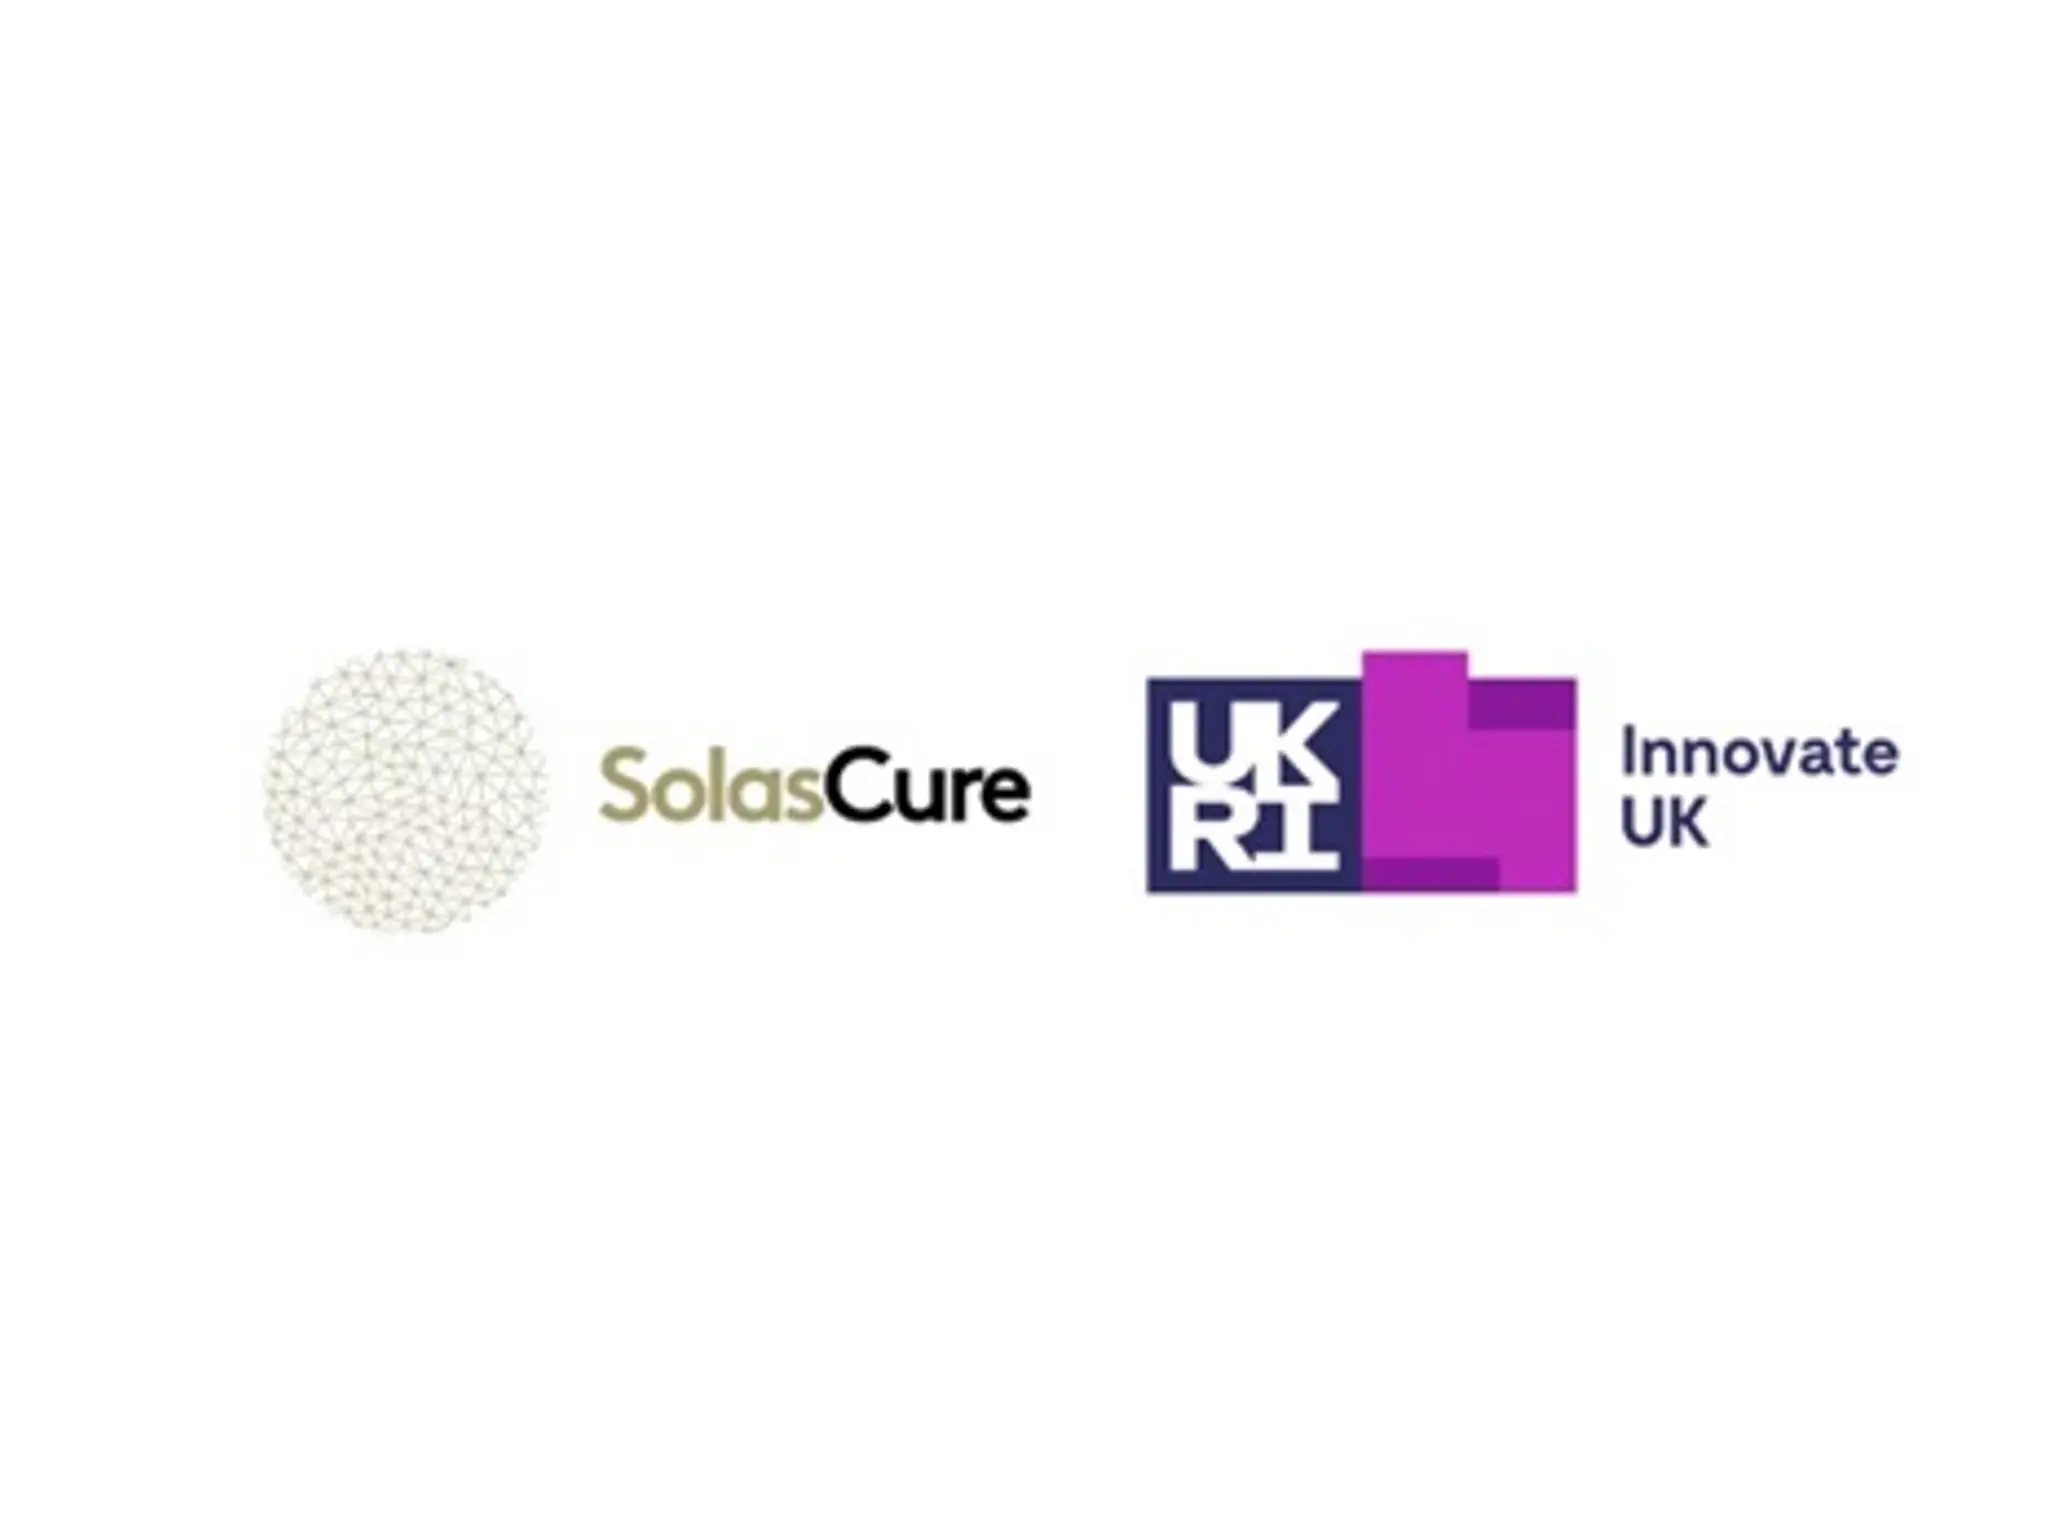  SolasCure Awarded £405K Innovate UK Biomedical Catalyst Grant to Advance Chronic Wound Care